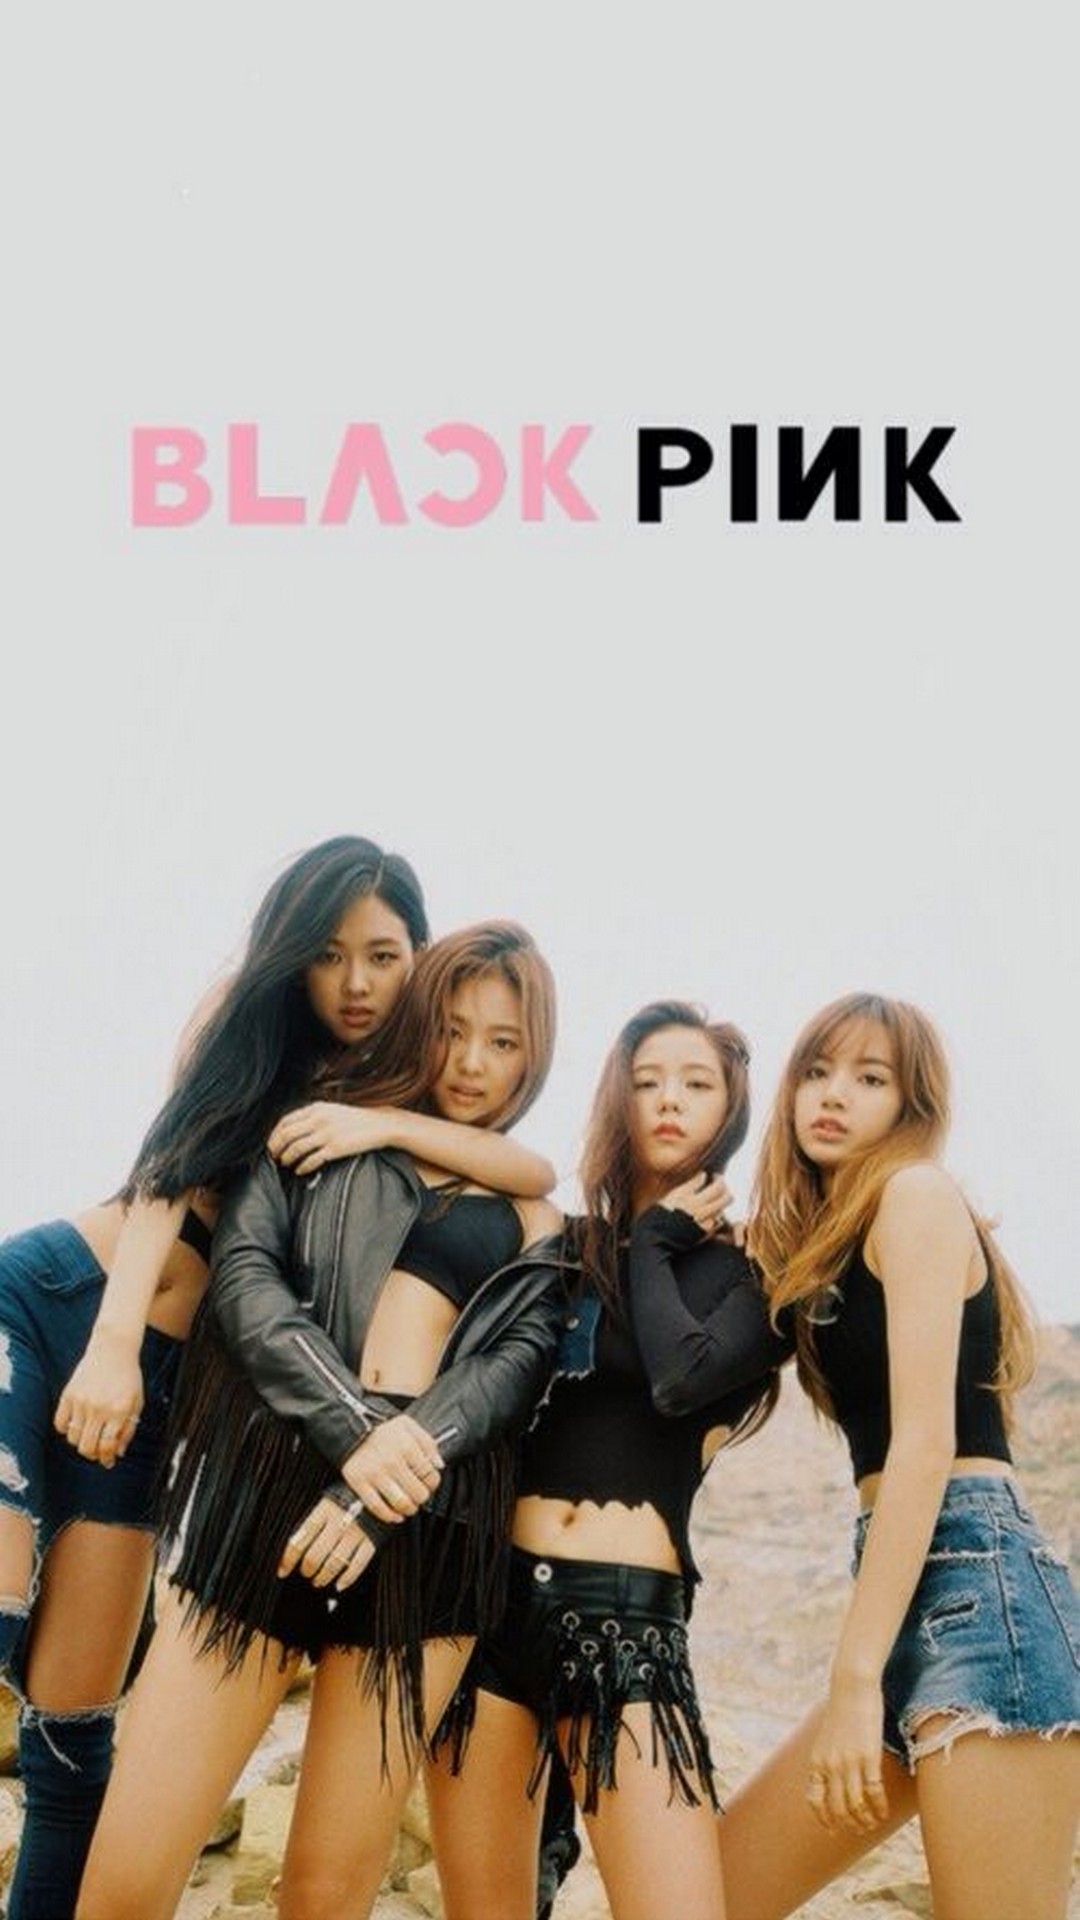 K-POP Blackpink Wallpaper iPhone with high-resolution 1080x1920 pixel. You can use this wallpaper for your iPhone 5, 6, 7, 8, X, XS, XR backgrounds, Mobile Screensaver, or iPad Lock Screen